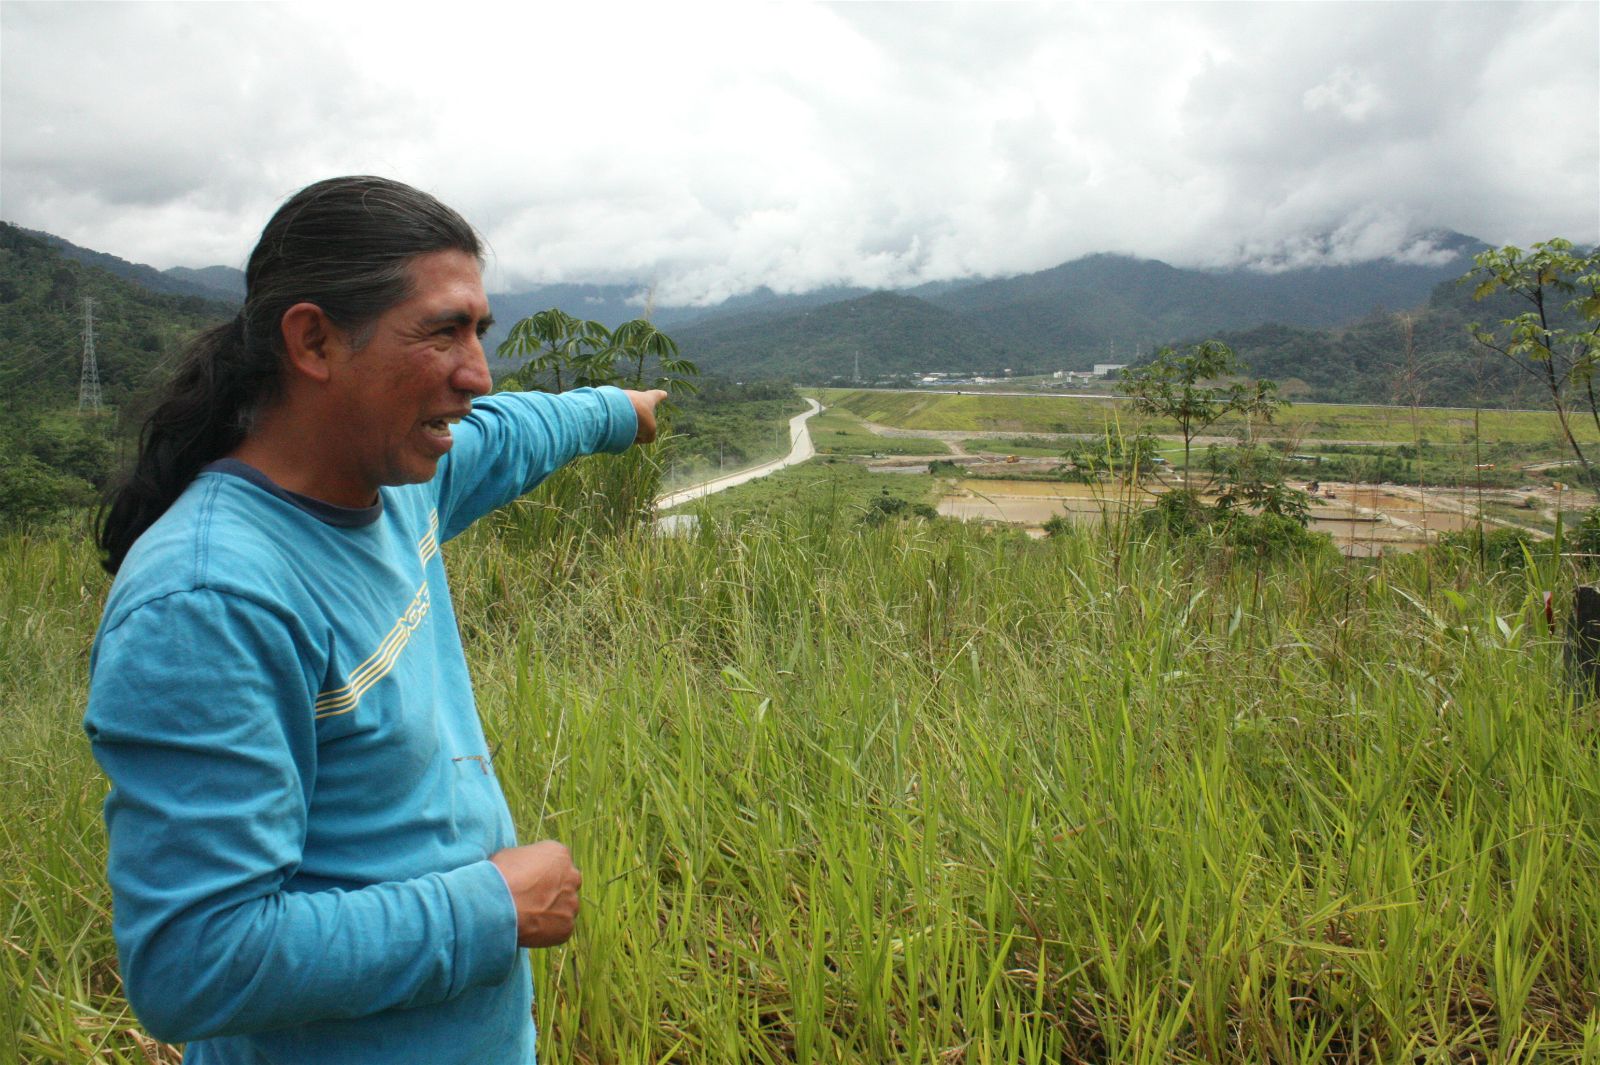 Luis Sánchez Shiminaycela points to the construction works near the house he was evicted from. Image by Andrés Bermúdez Liévano. Ecuador, 2019.